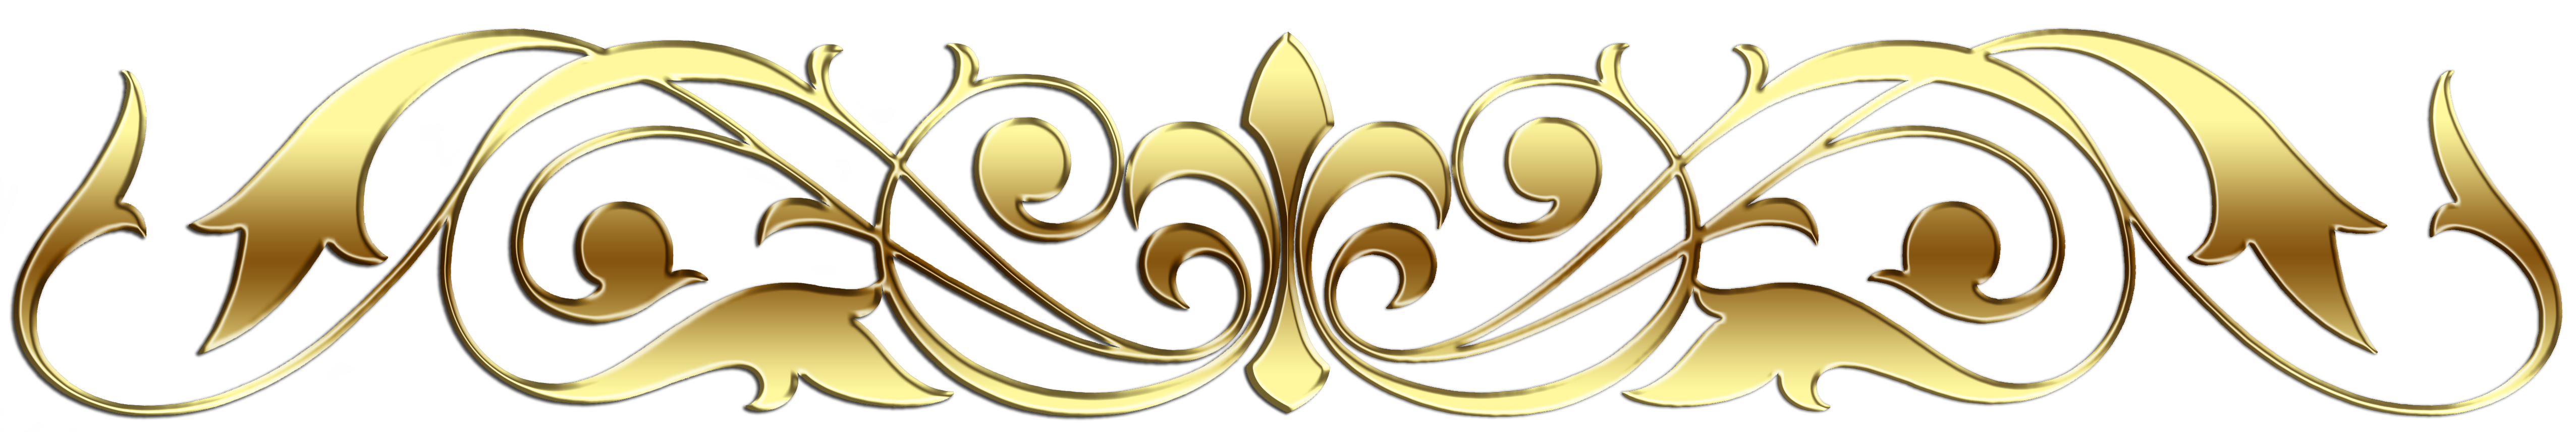 Index Of /mobile/images - Gold Borders Design Png (5105x856)